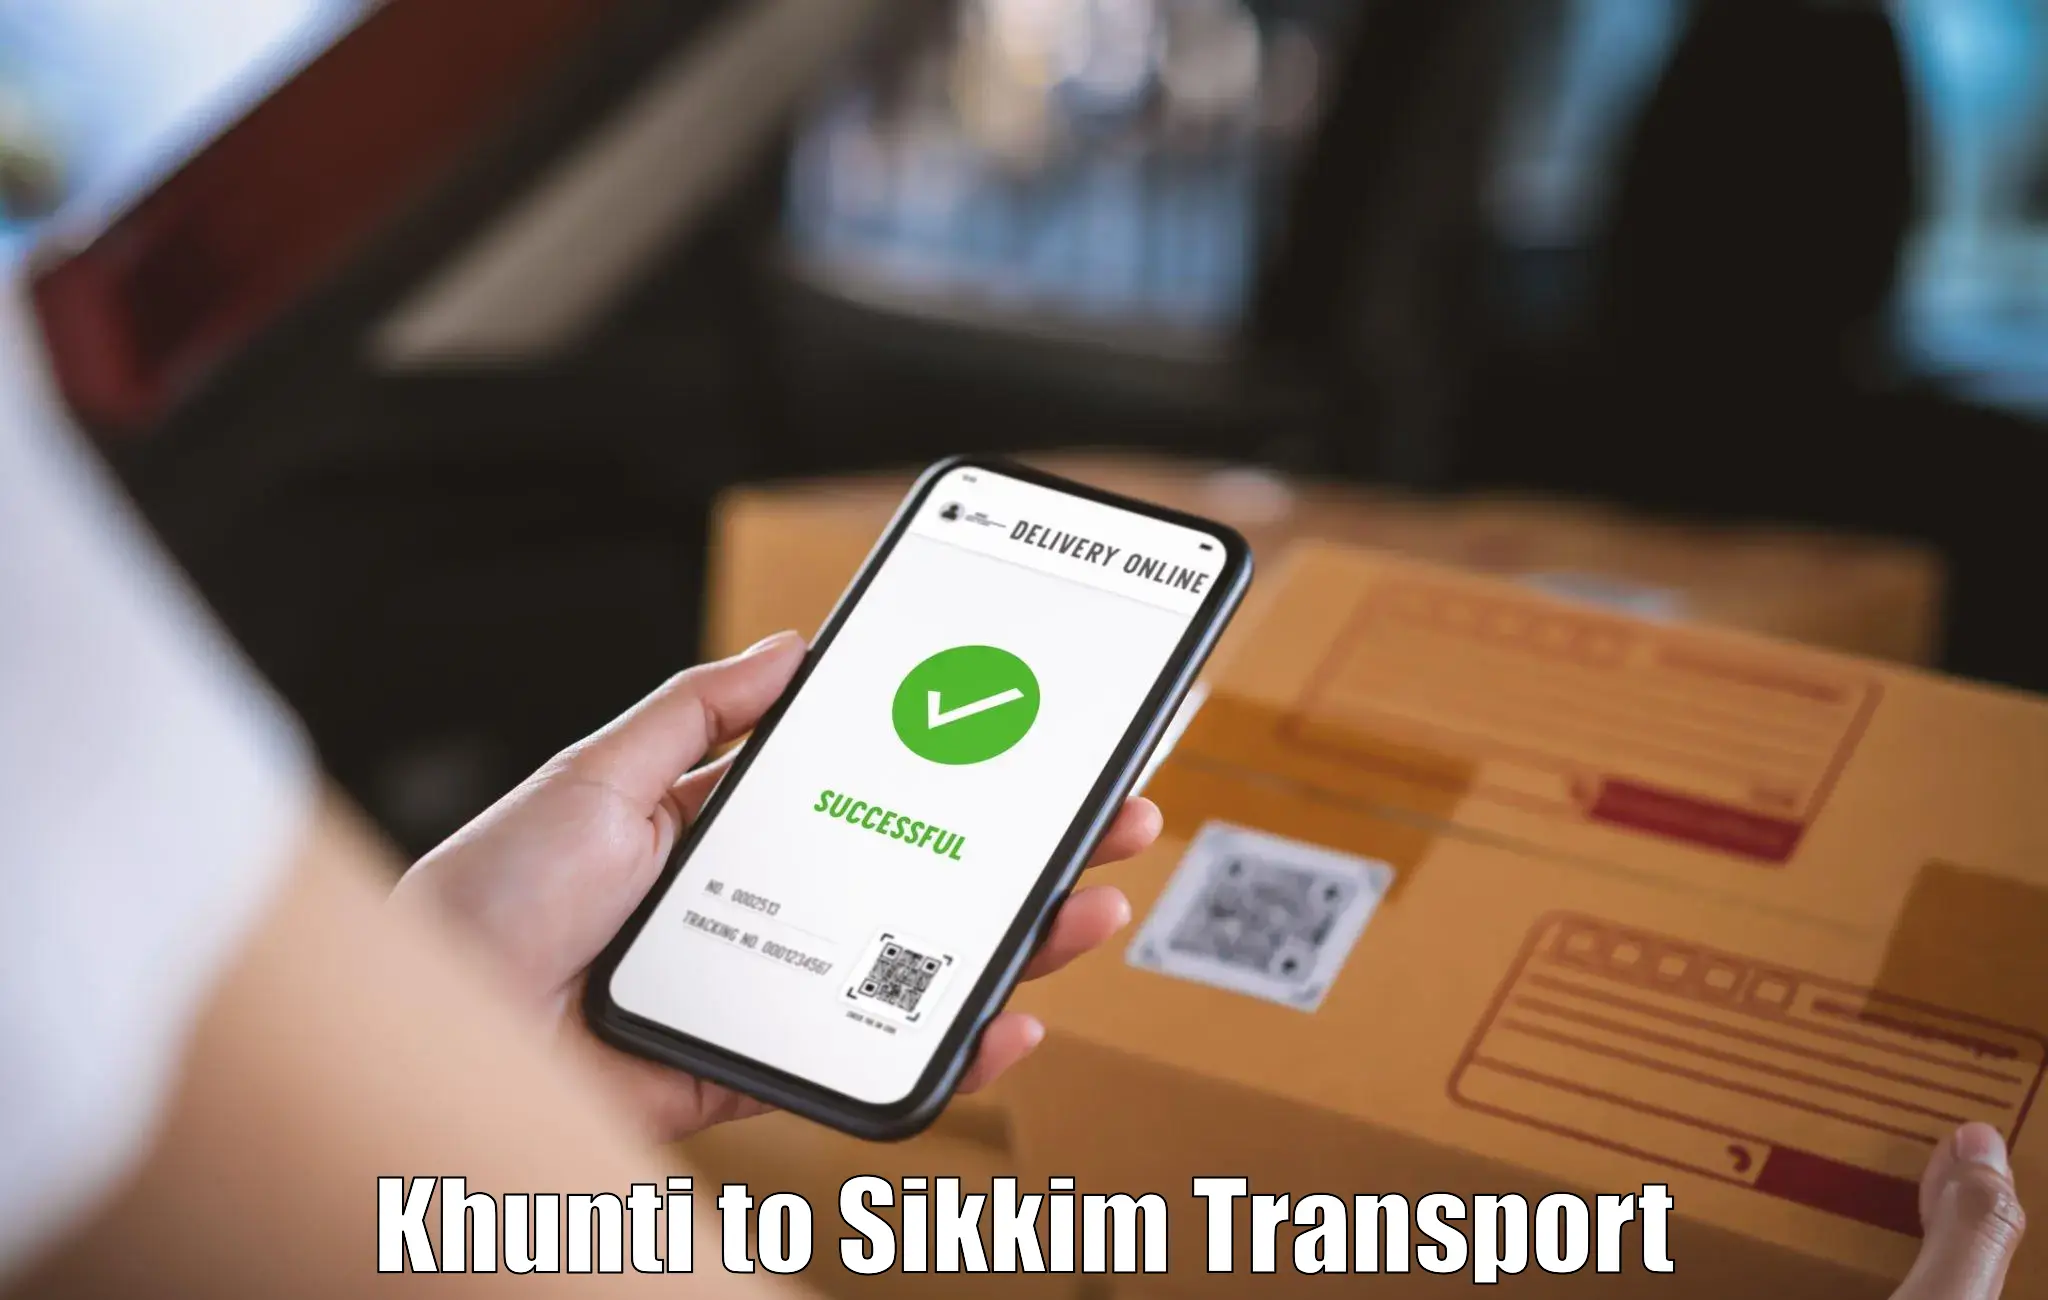 Container transportation services Khunti to East Sikkim